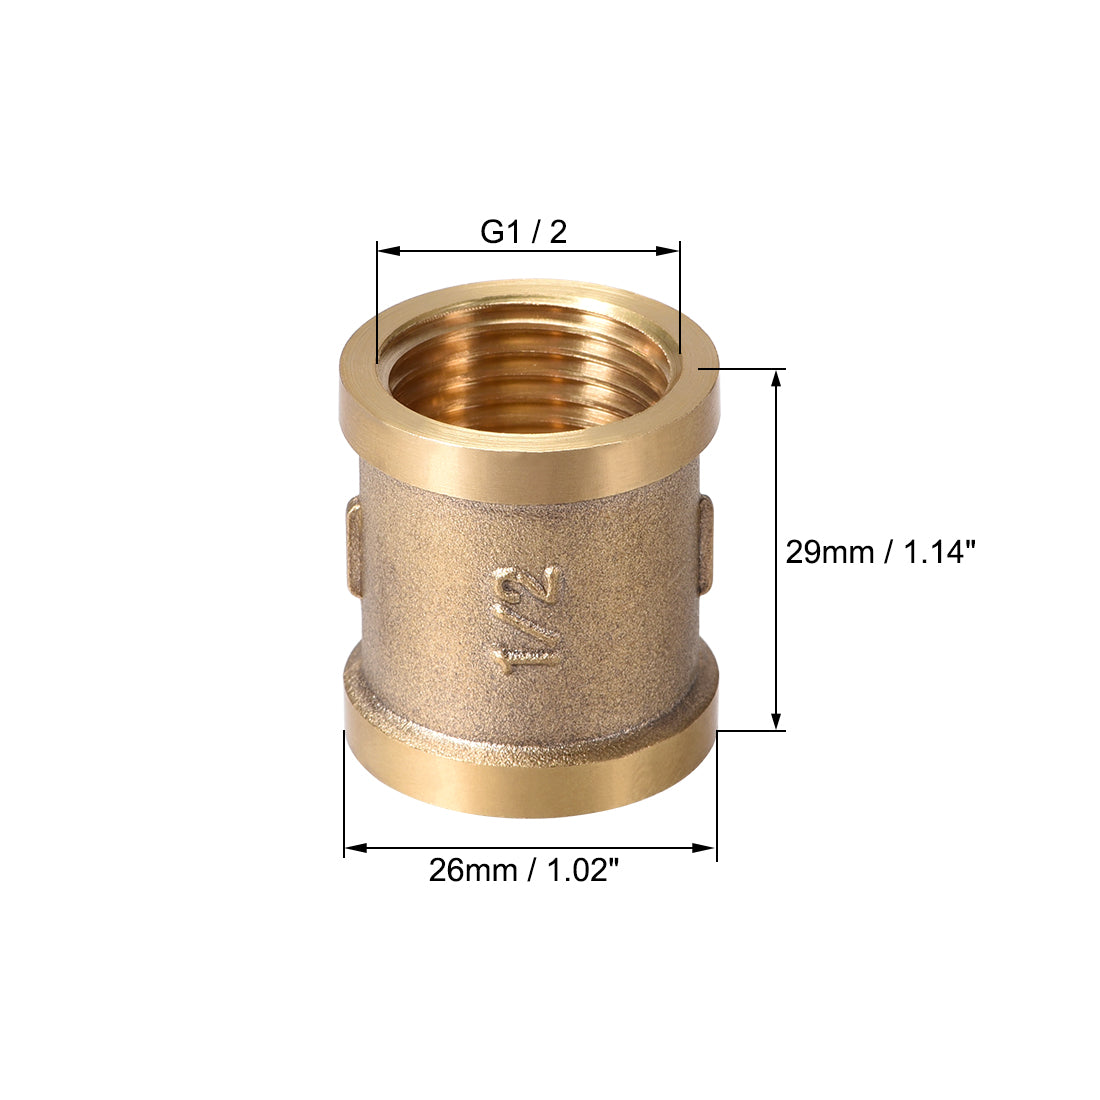 uxcell Brass Tee Pipe Fitting 1/2 PT Male Thread T Shaped Connector Coupler  2pcs, Pipe Fittings -  Canada